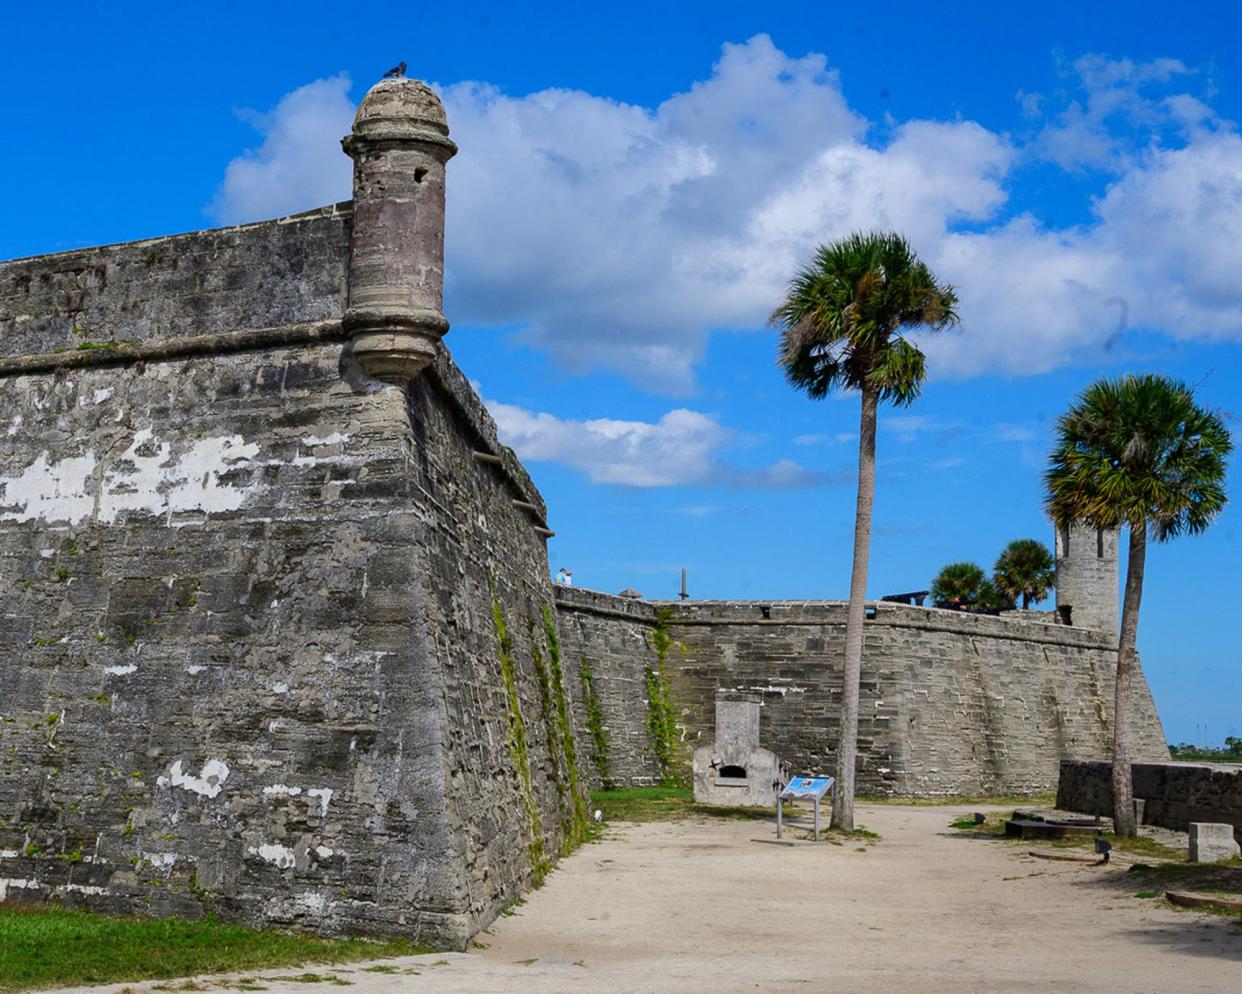 Castillo de San Marcos National Monument in St. Augustine on Tuesday, Oct. 19, 2021.